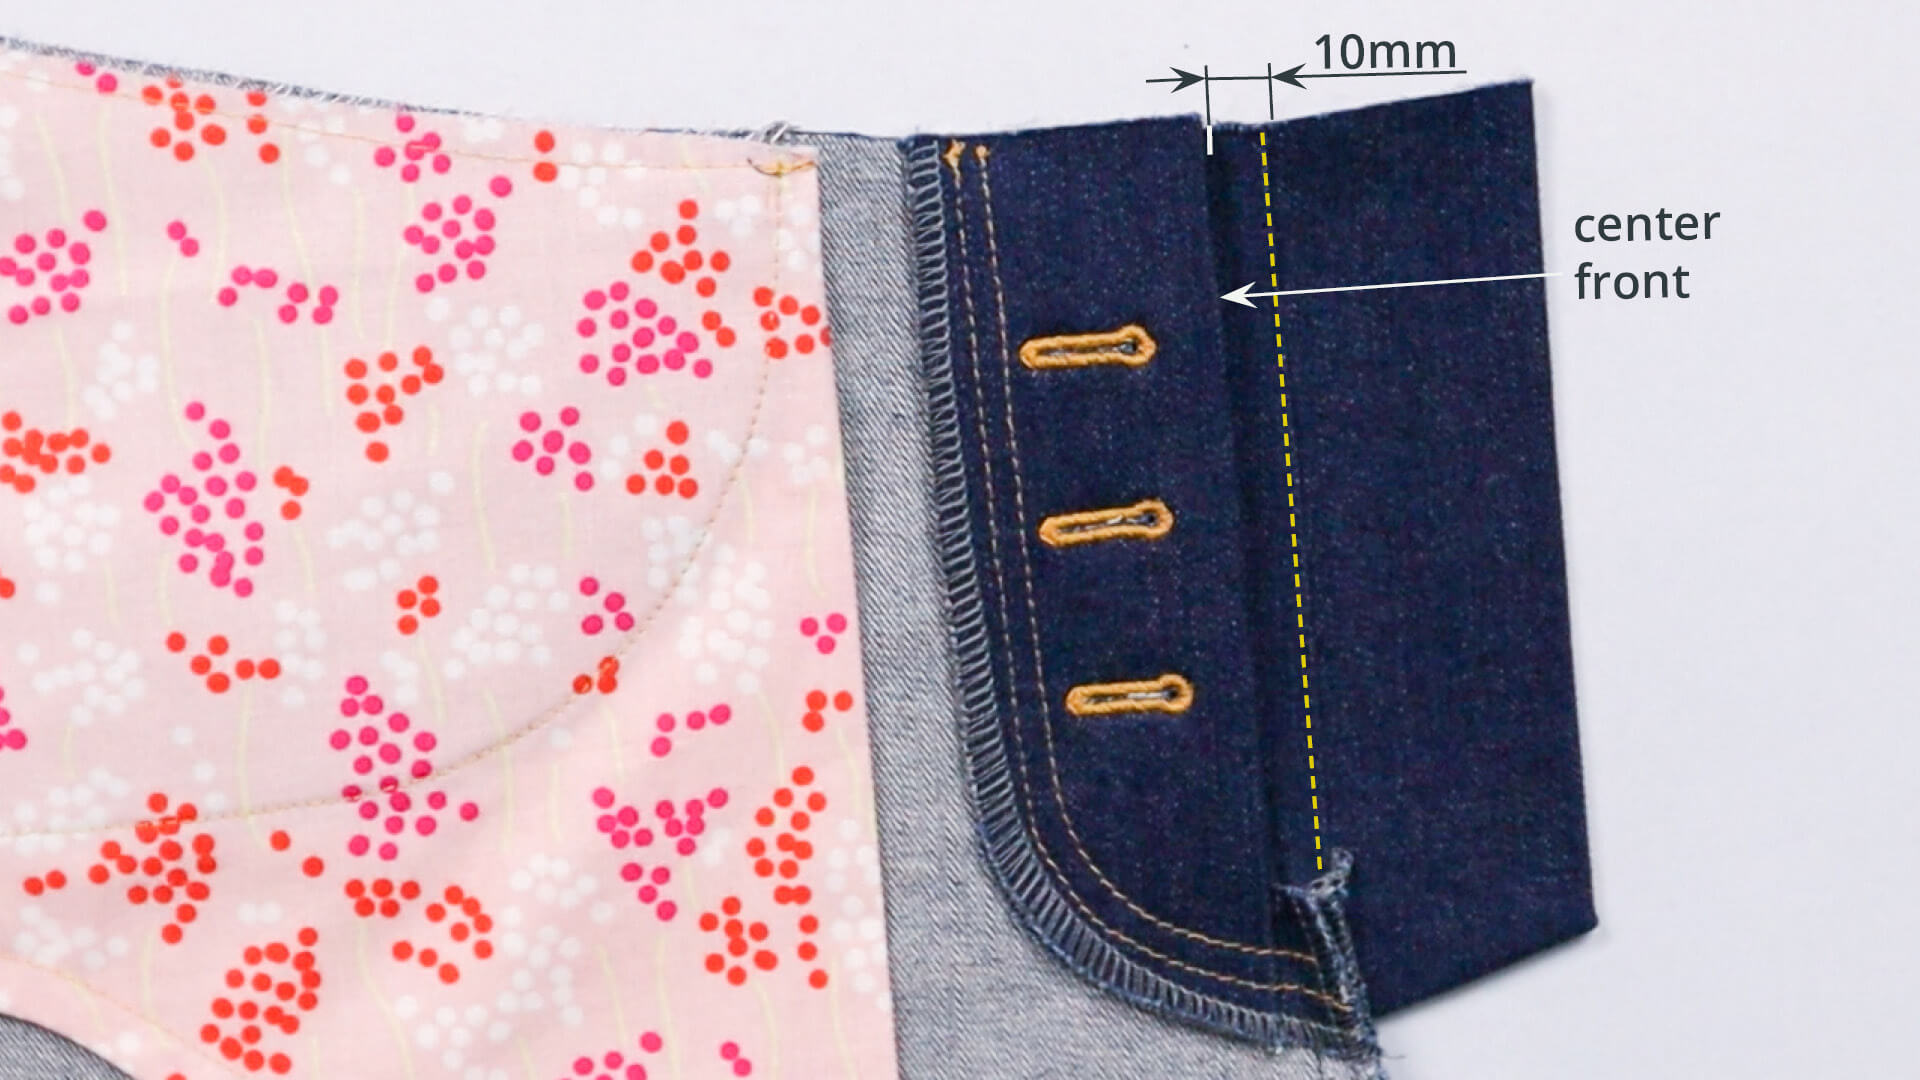 smartPATTERN sewing instructions for slit with concealed button placket on jeans - center front at 10 mm from the underlap seam